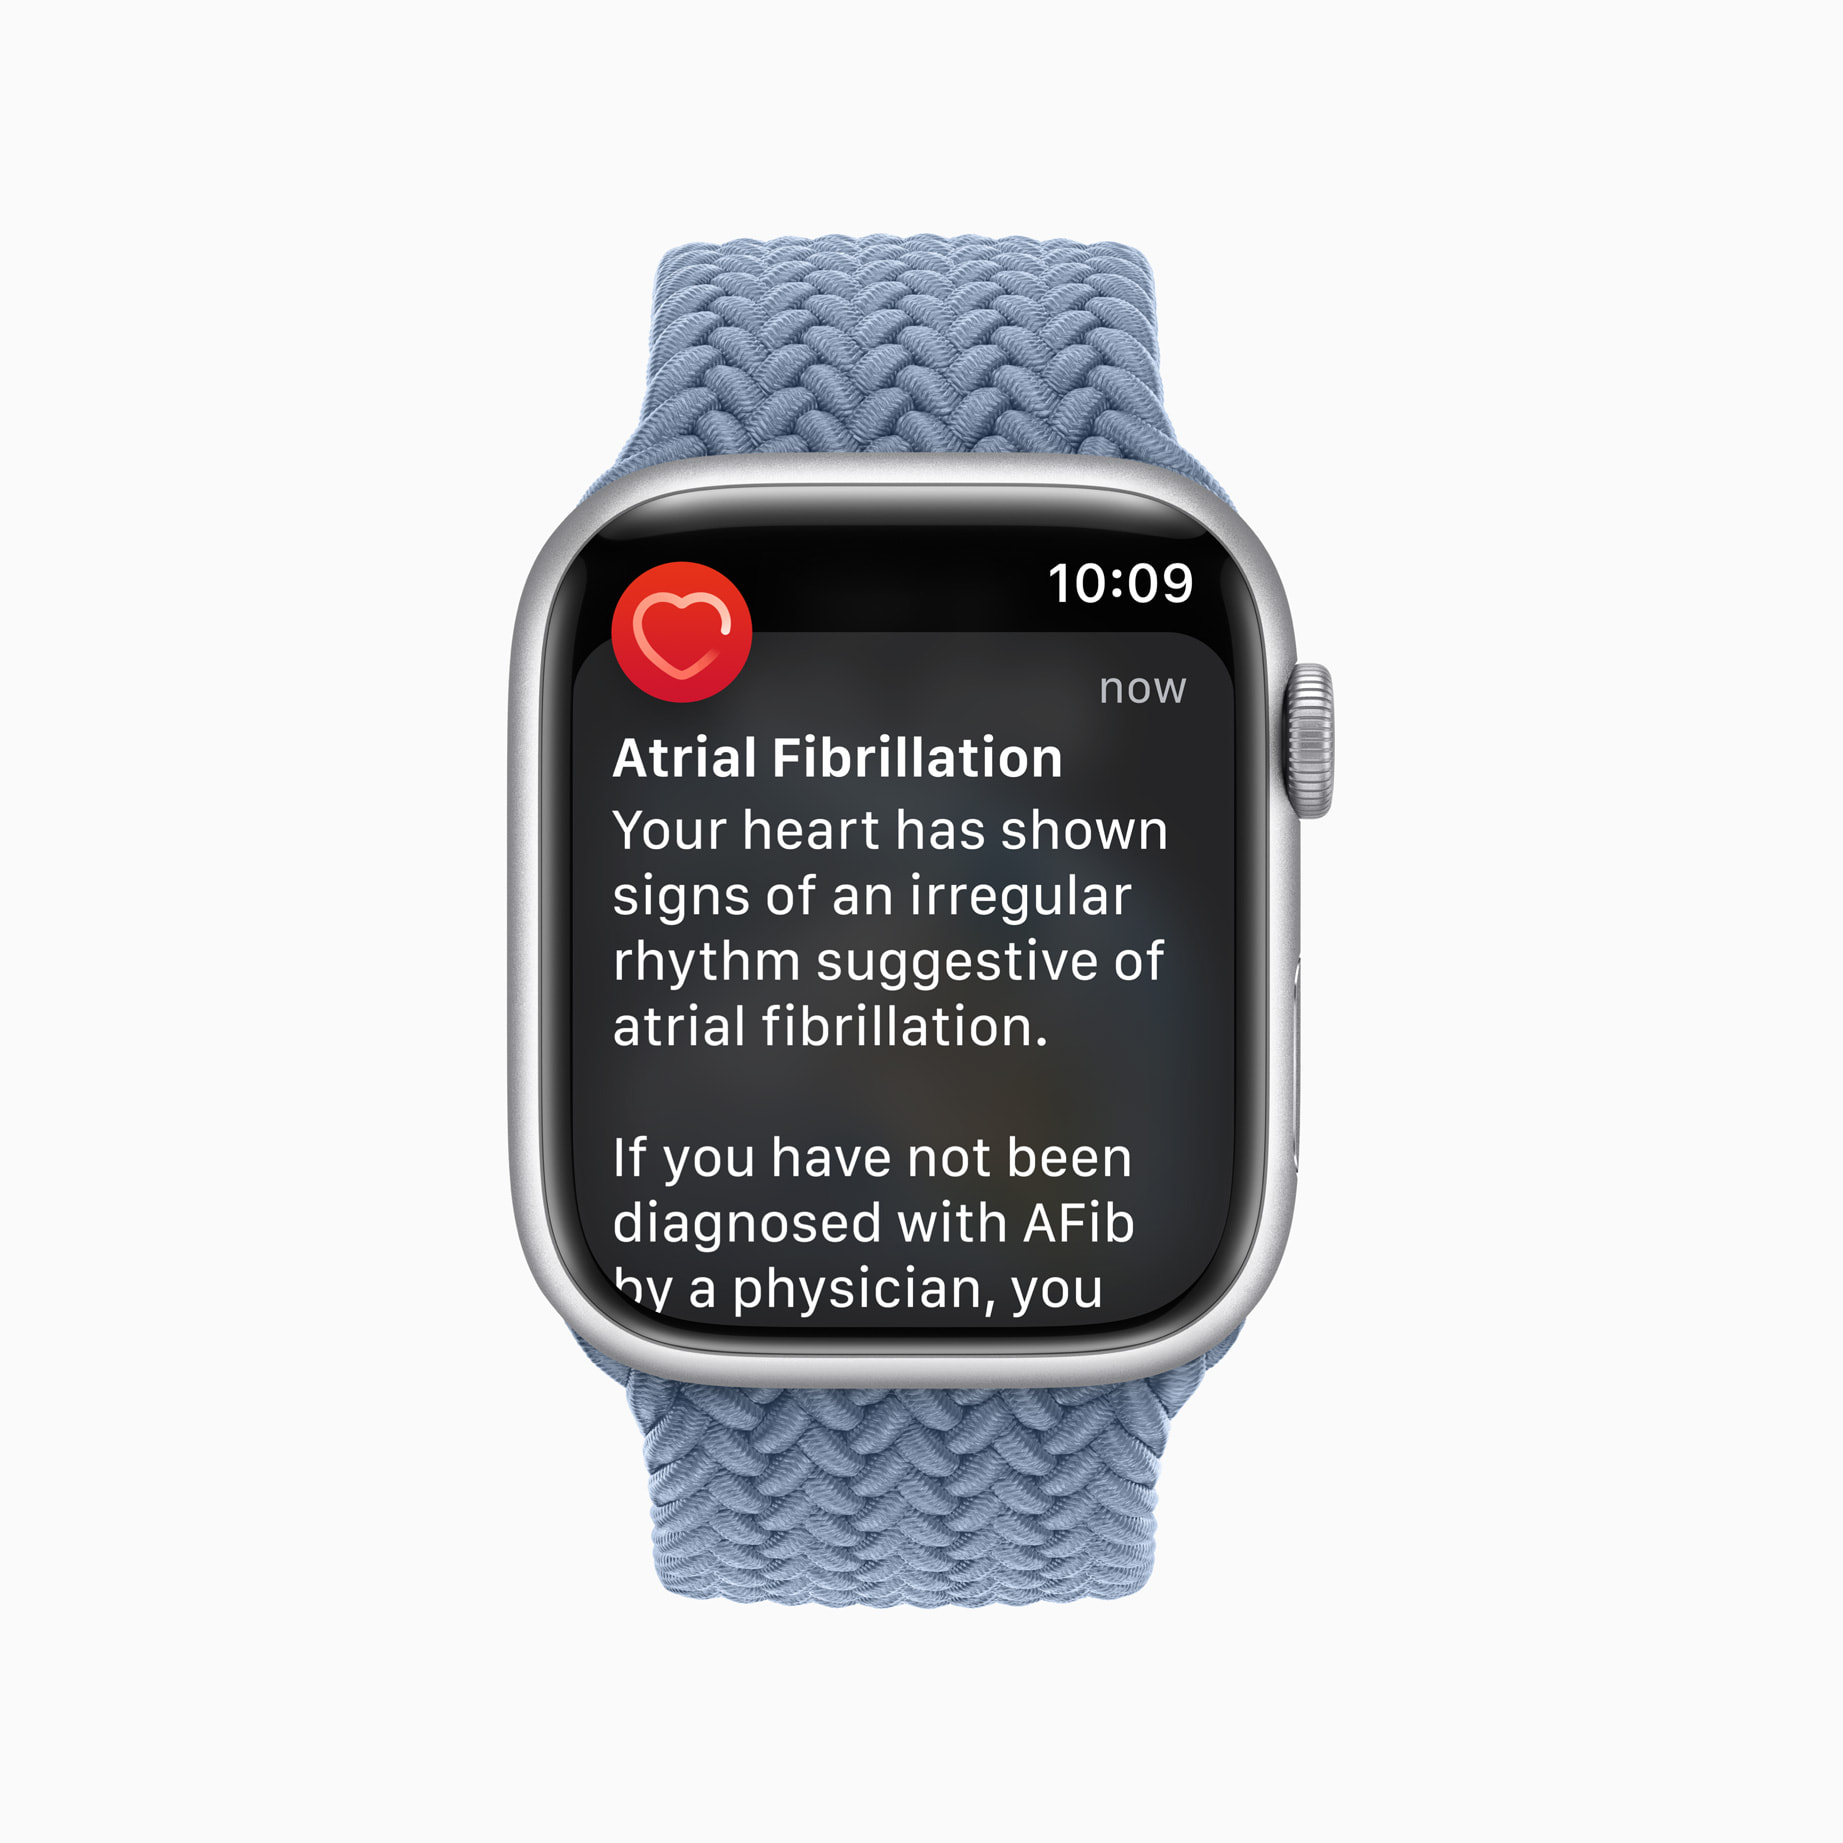 Apple, J&J Launch New mHealth Study Targeting Wearables and AFib